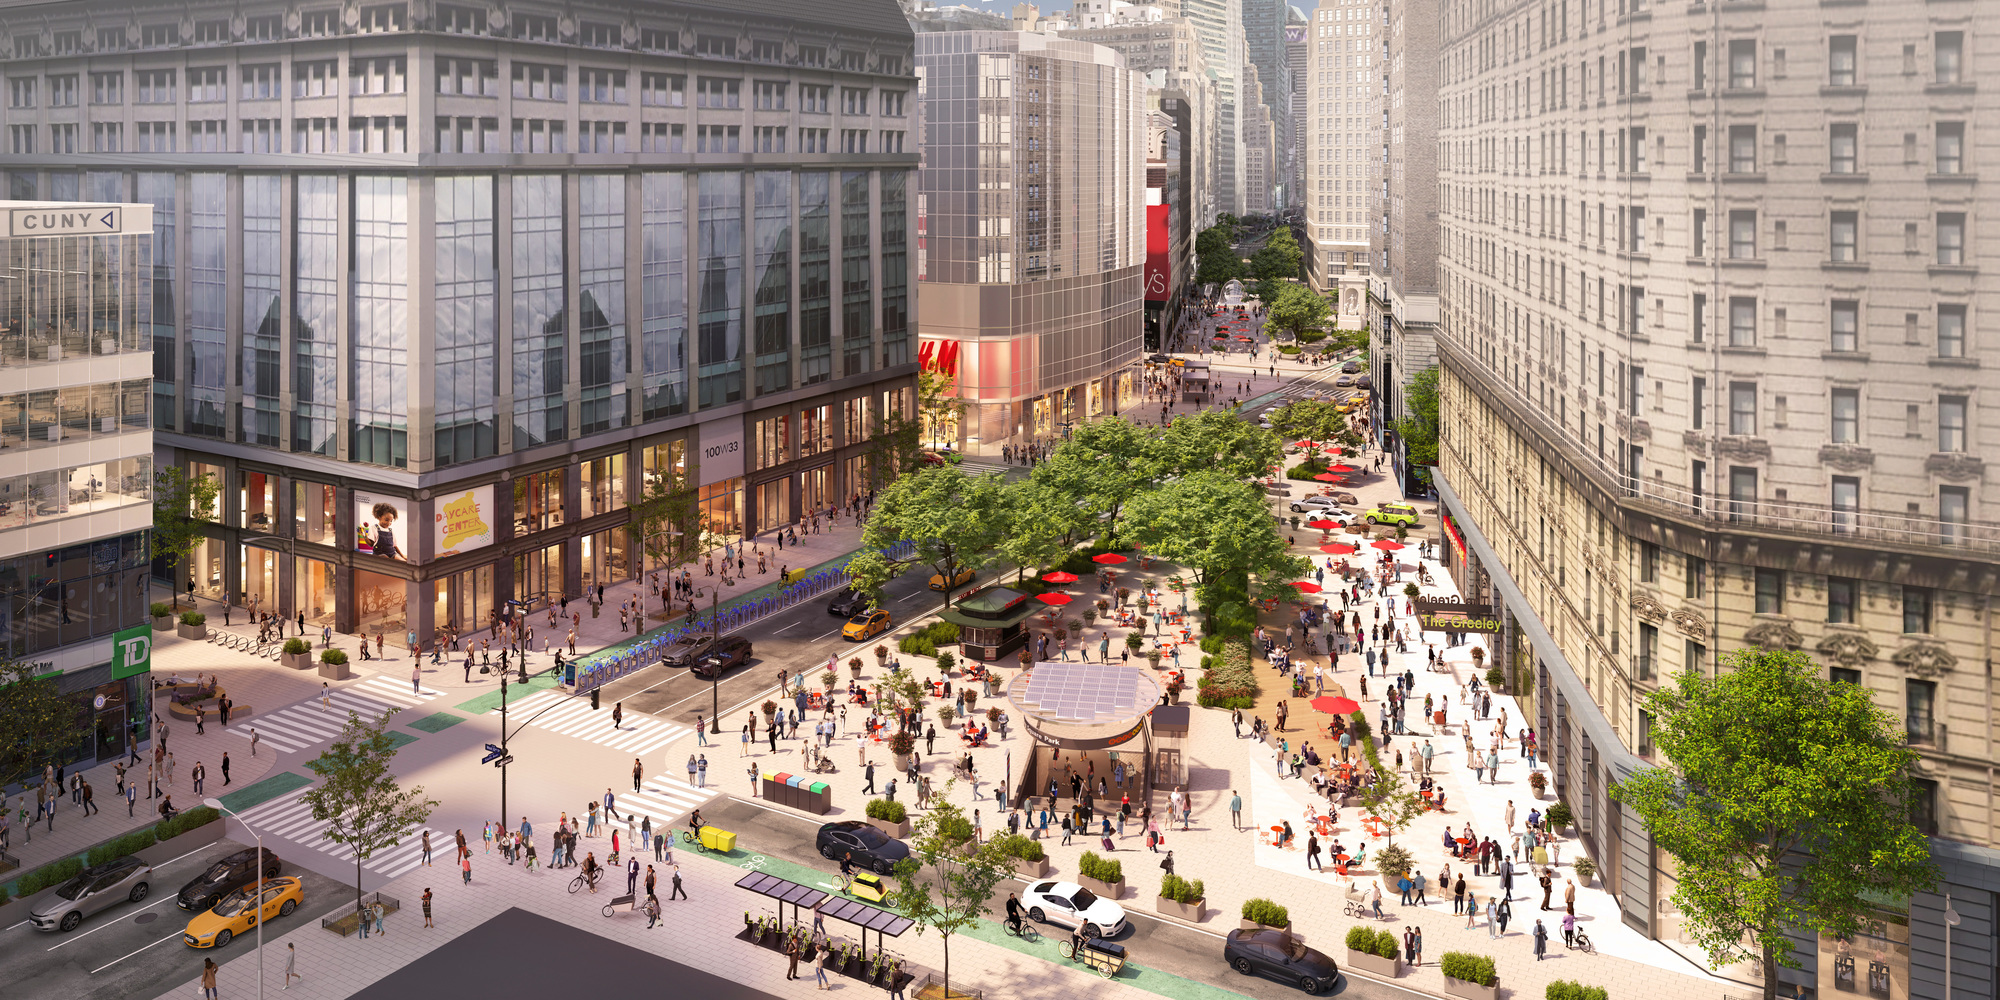 Rendering of Greeley Square after capital construction work is completed.